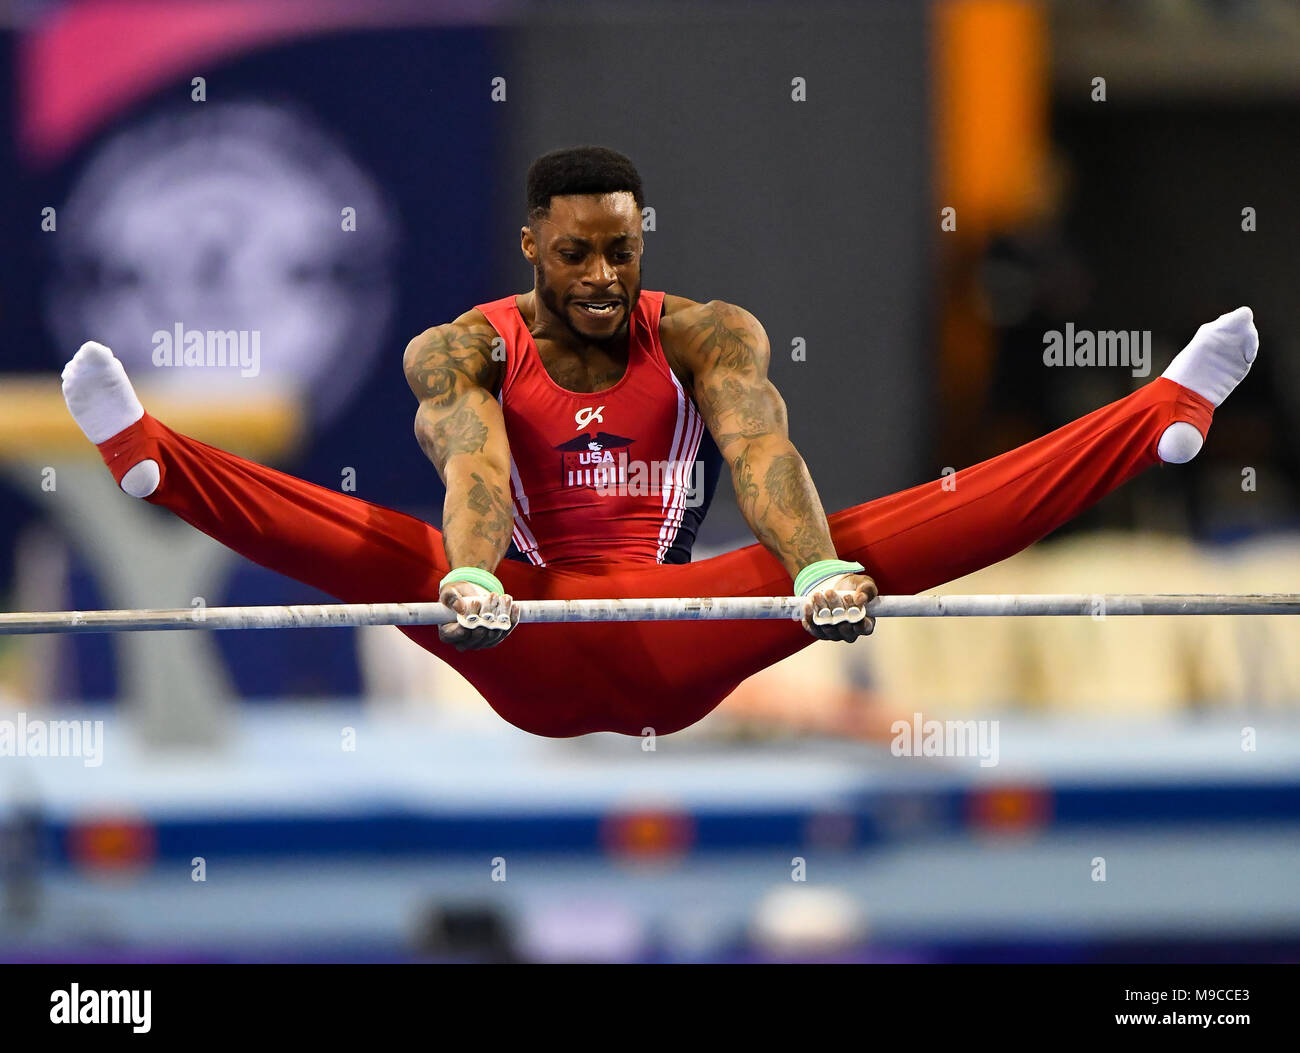 Doha, Capital of Qatar. 24th Mar, 2018. Marvin Kimble of the United States competes during the Men's Horizontal Bar final at the 11th FIG Artistic Gymnastics Individual Apparatus World Cup in Doha, Capital of Qatar, on March 24, 2018. Marvin Kimble took the silver with 14.533 points. Credit: Nikku/Xinhua/Alamy Live News Stock Photo